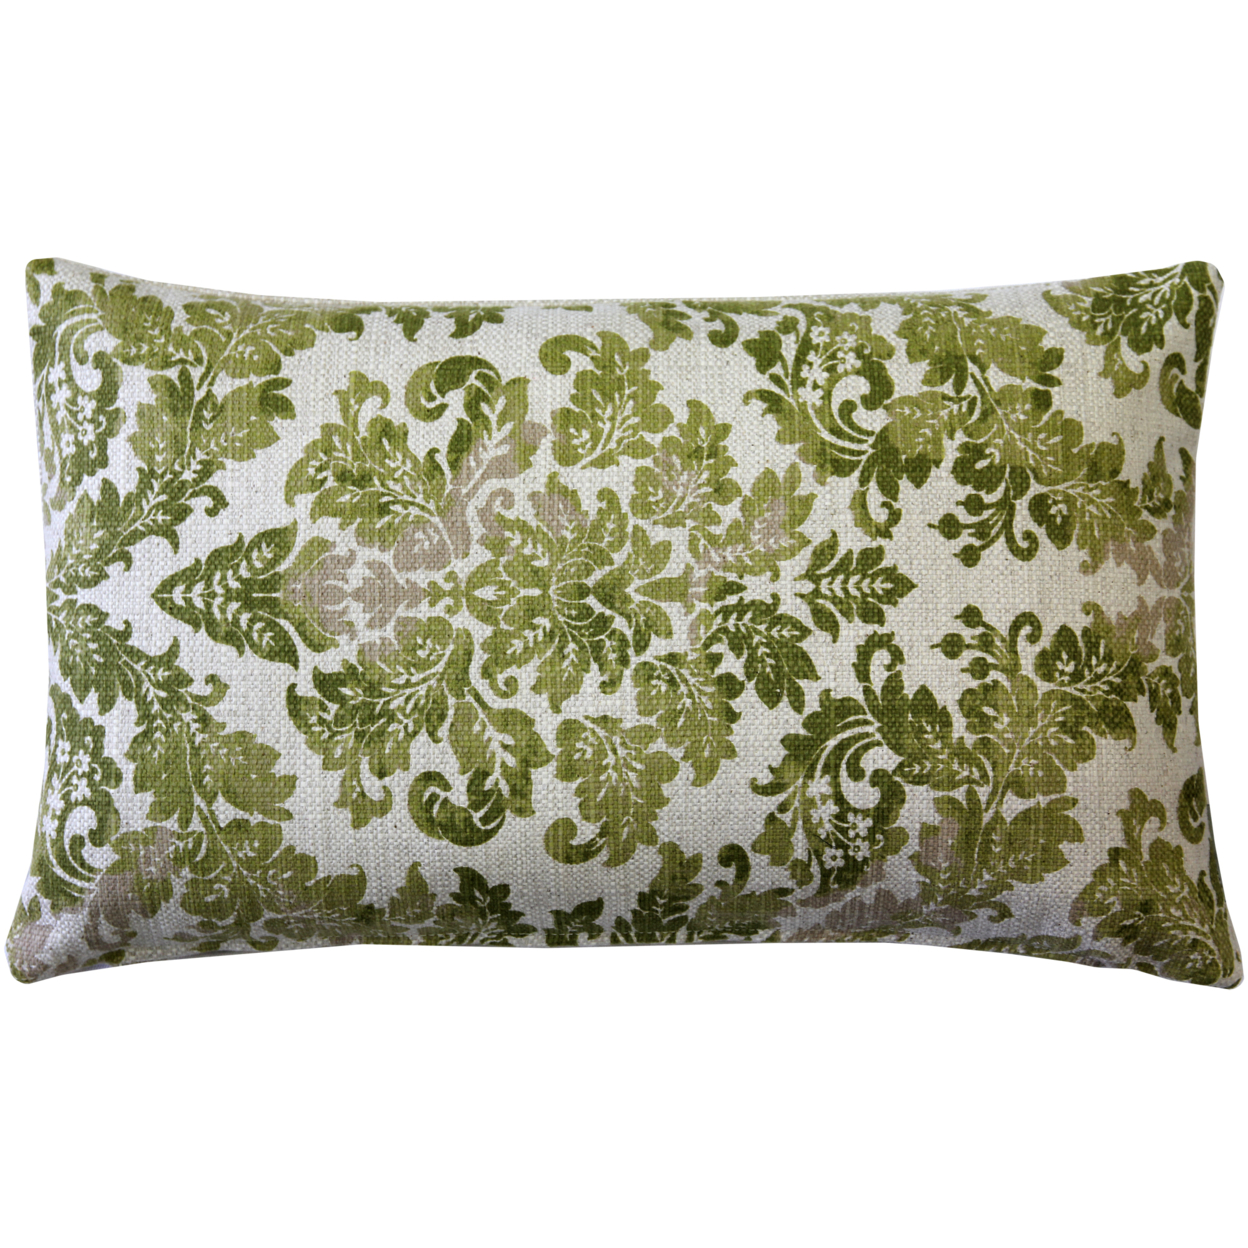 Calliope Green Damask Pattern Throw Pillow 12x20 Inches Square, Complete Pillow With Polyfill Pillow Insert